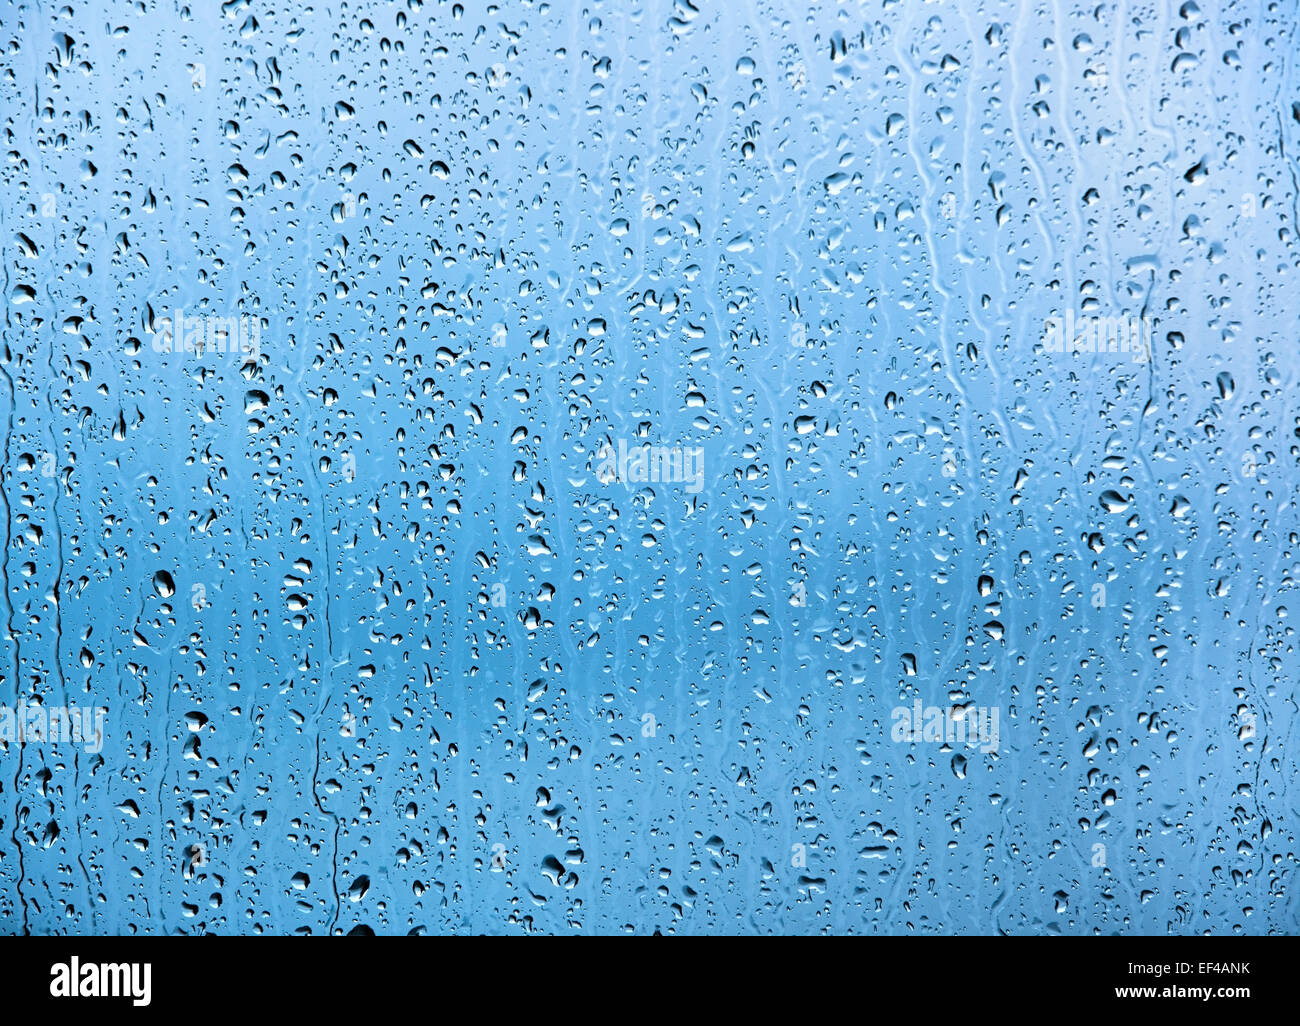 Water drops on glass texture or background. Blue tint. Stock Photo